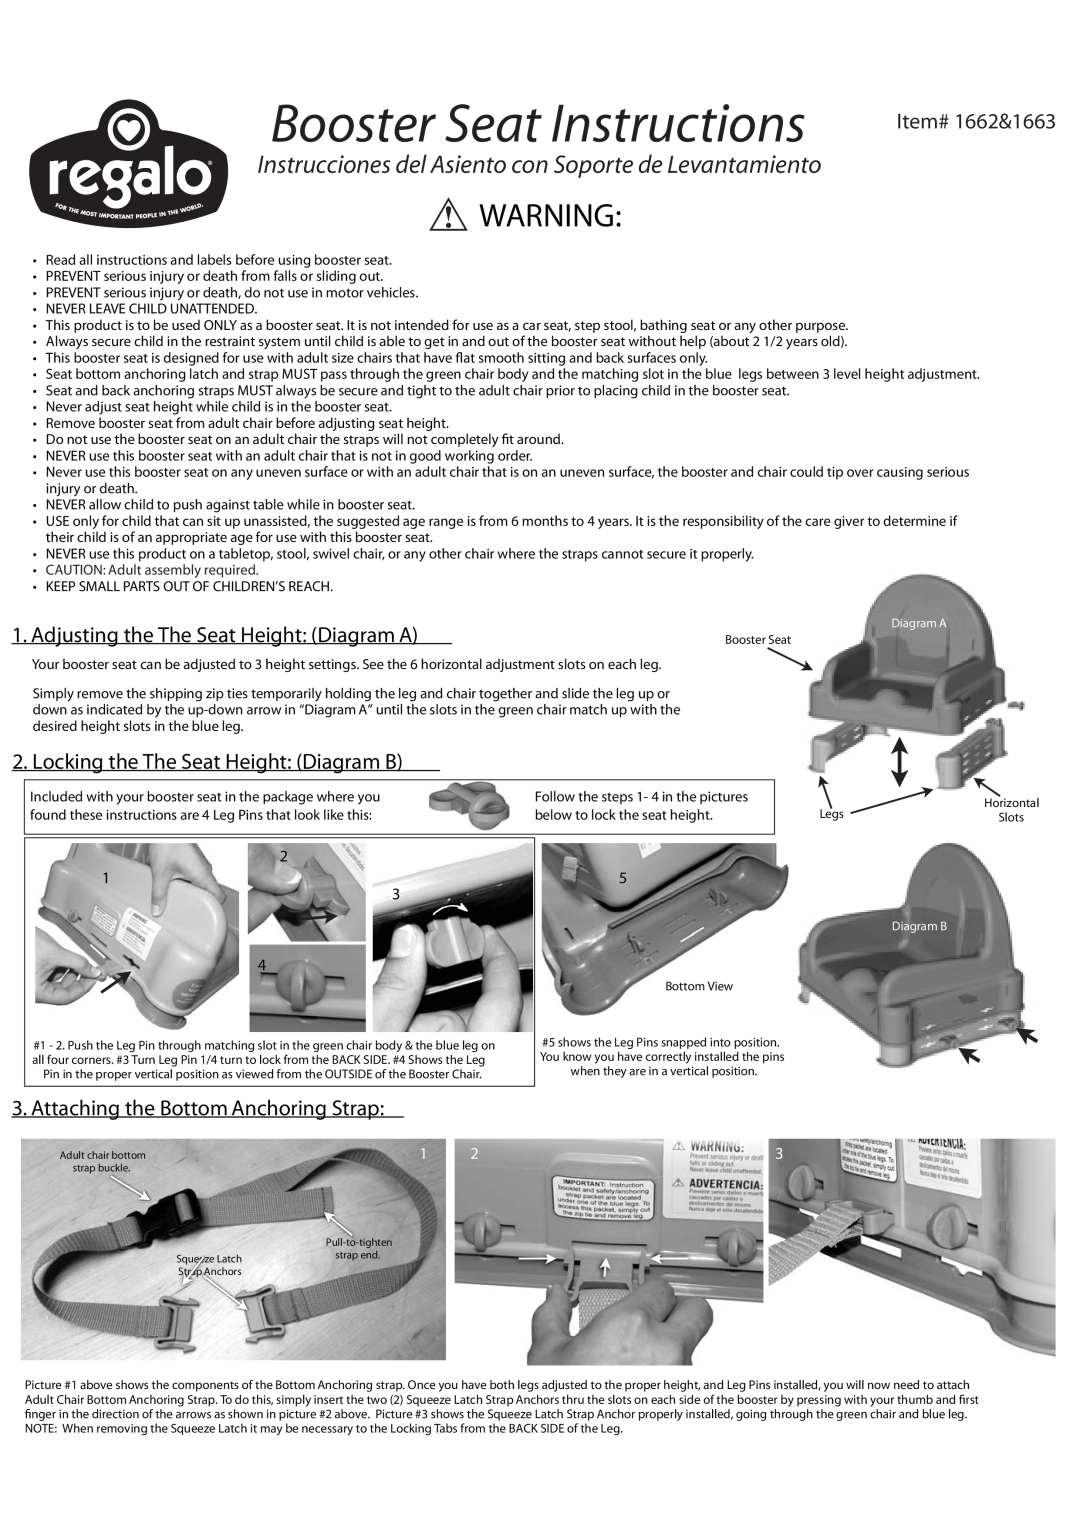 Regalo manual Adjusting the The Seat Height Diagram A, Locking the The Seat Height Diagram B, Item# 1662&1663 